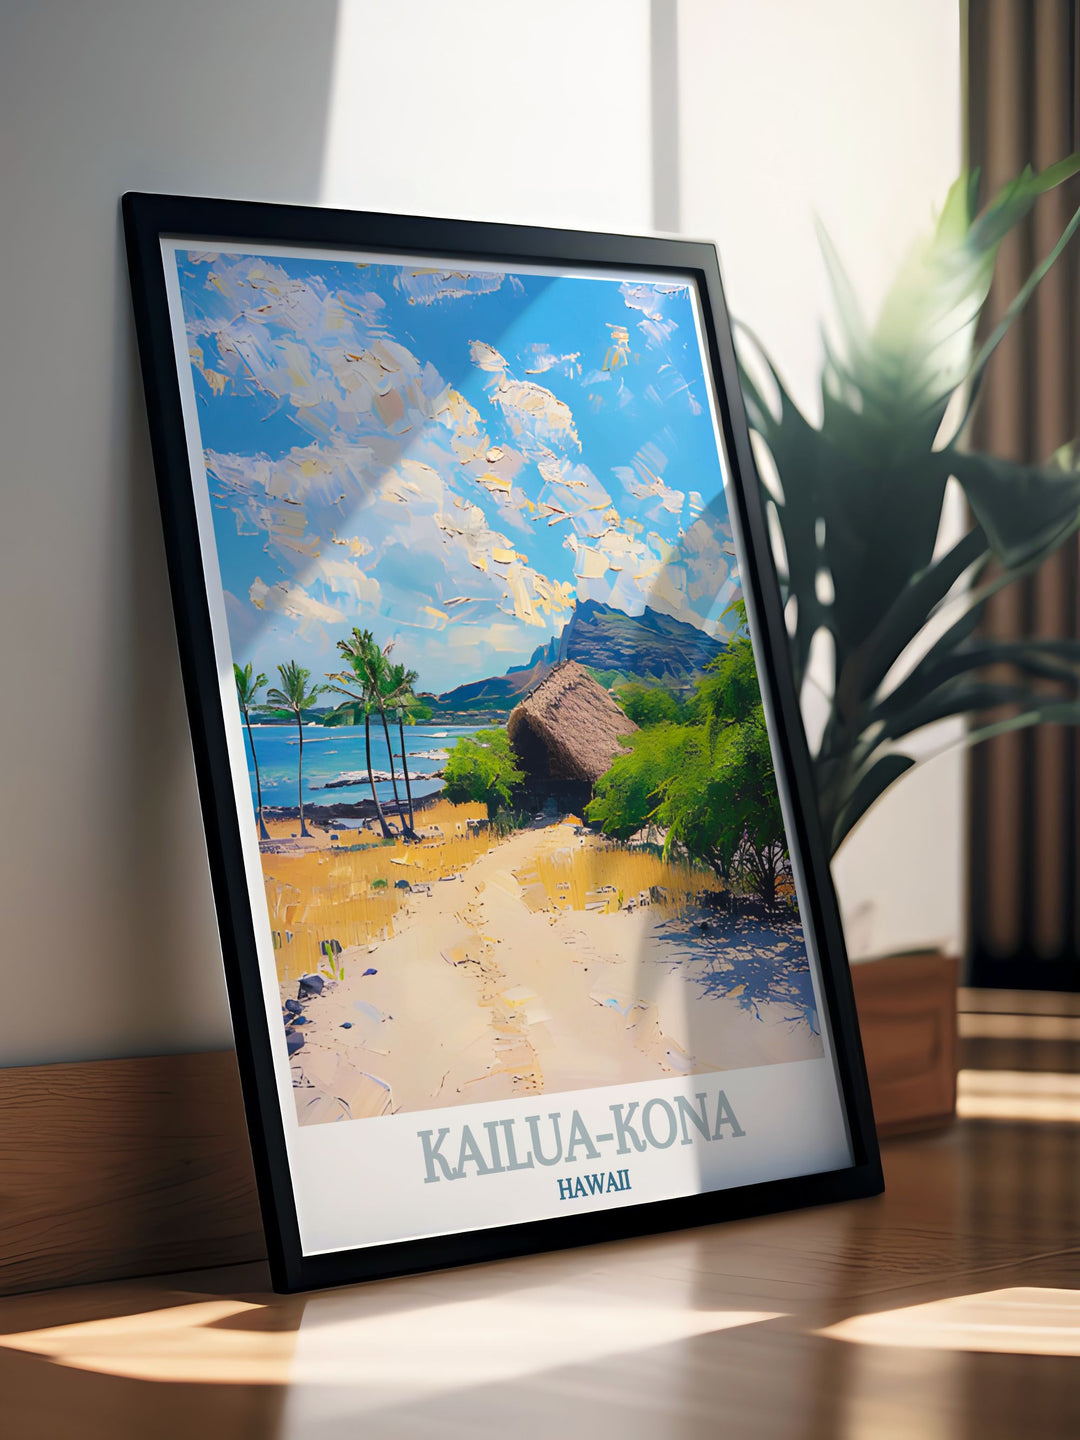 Poster of Kailua Kona, highlighting its vibrant beaches and historical landmarks. The artwork celebrates the architectural grandeur and cultural richness of this Hawaiian town.